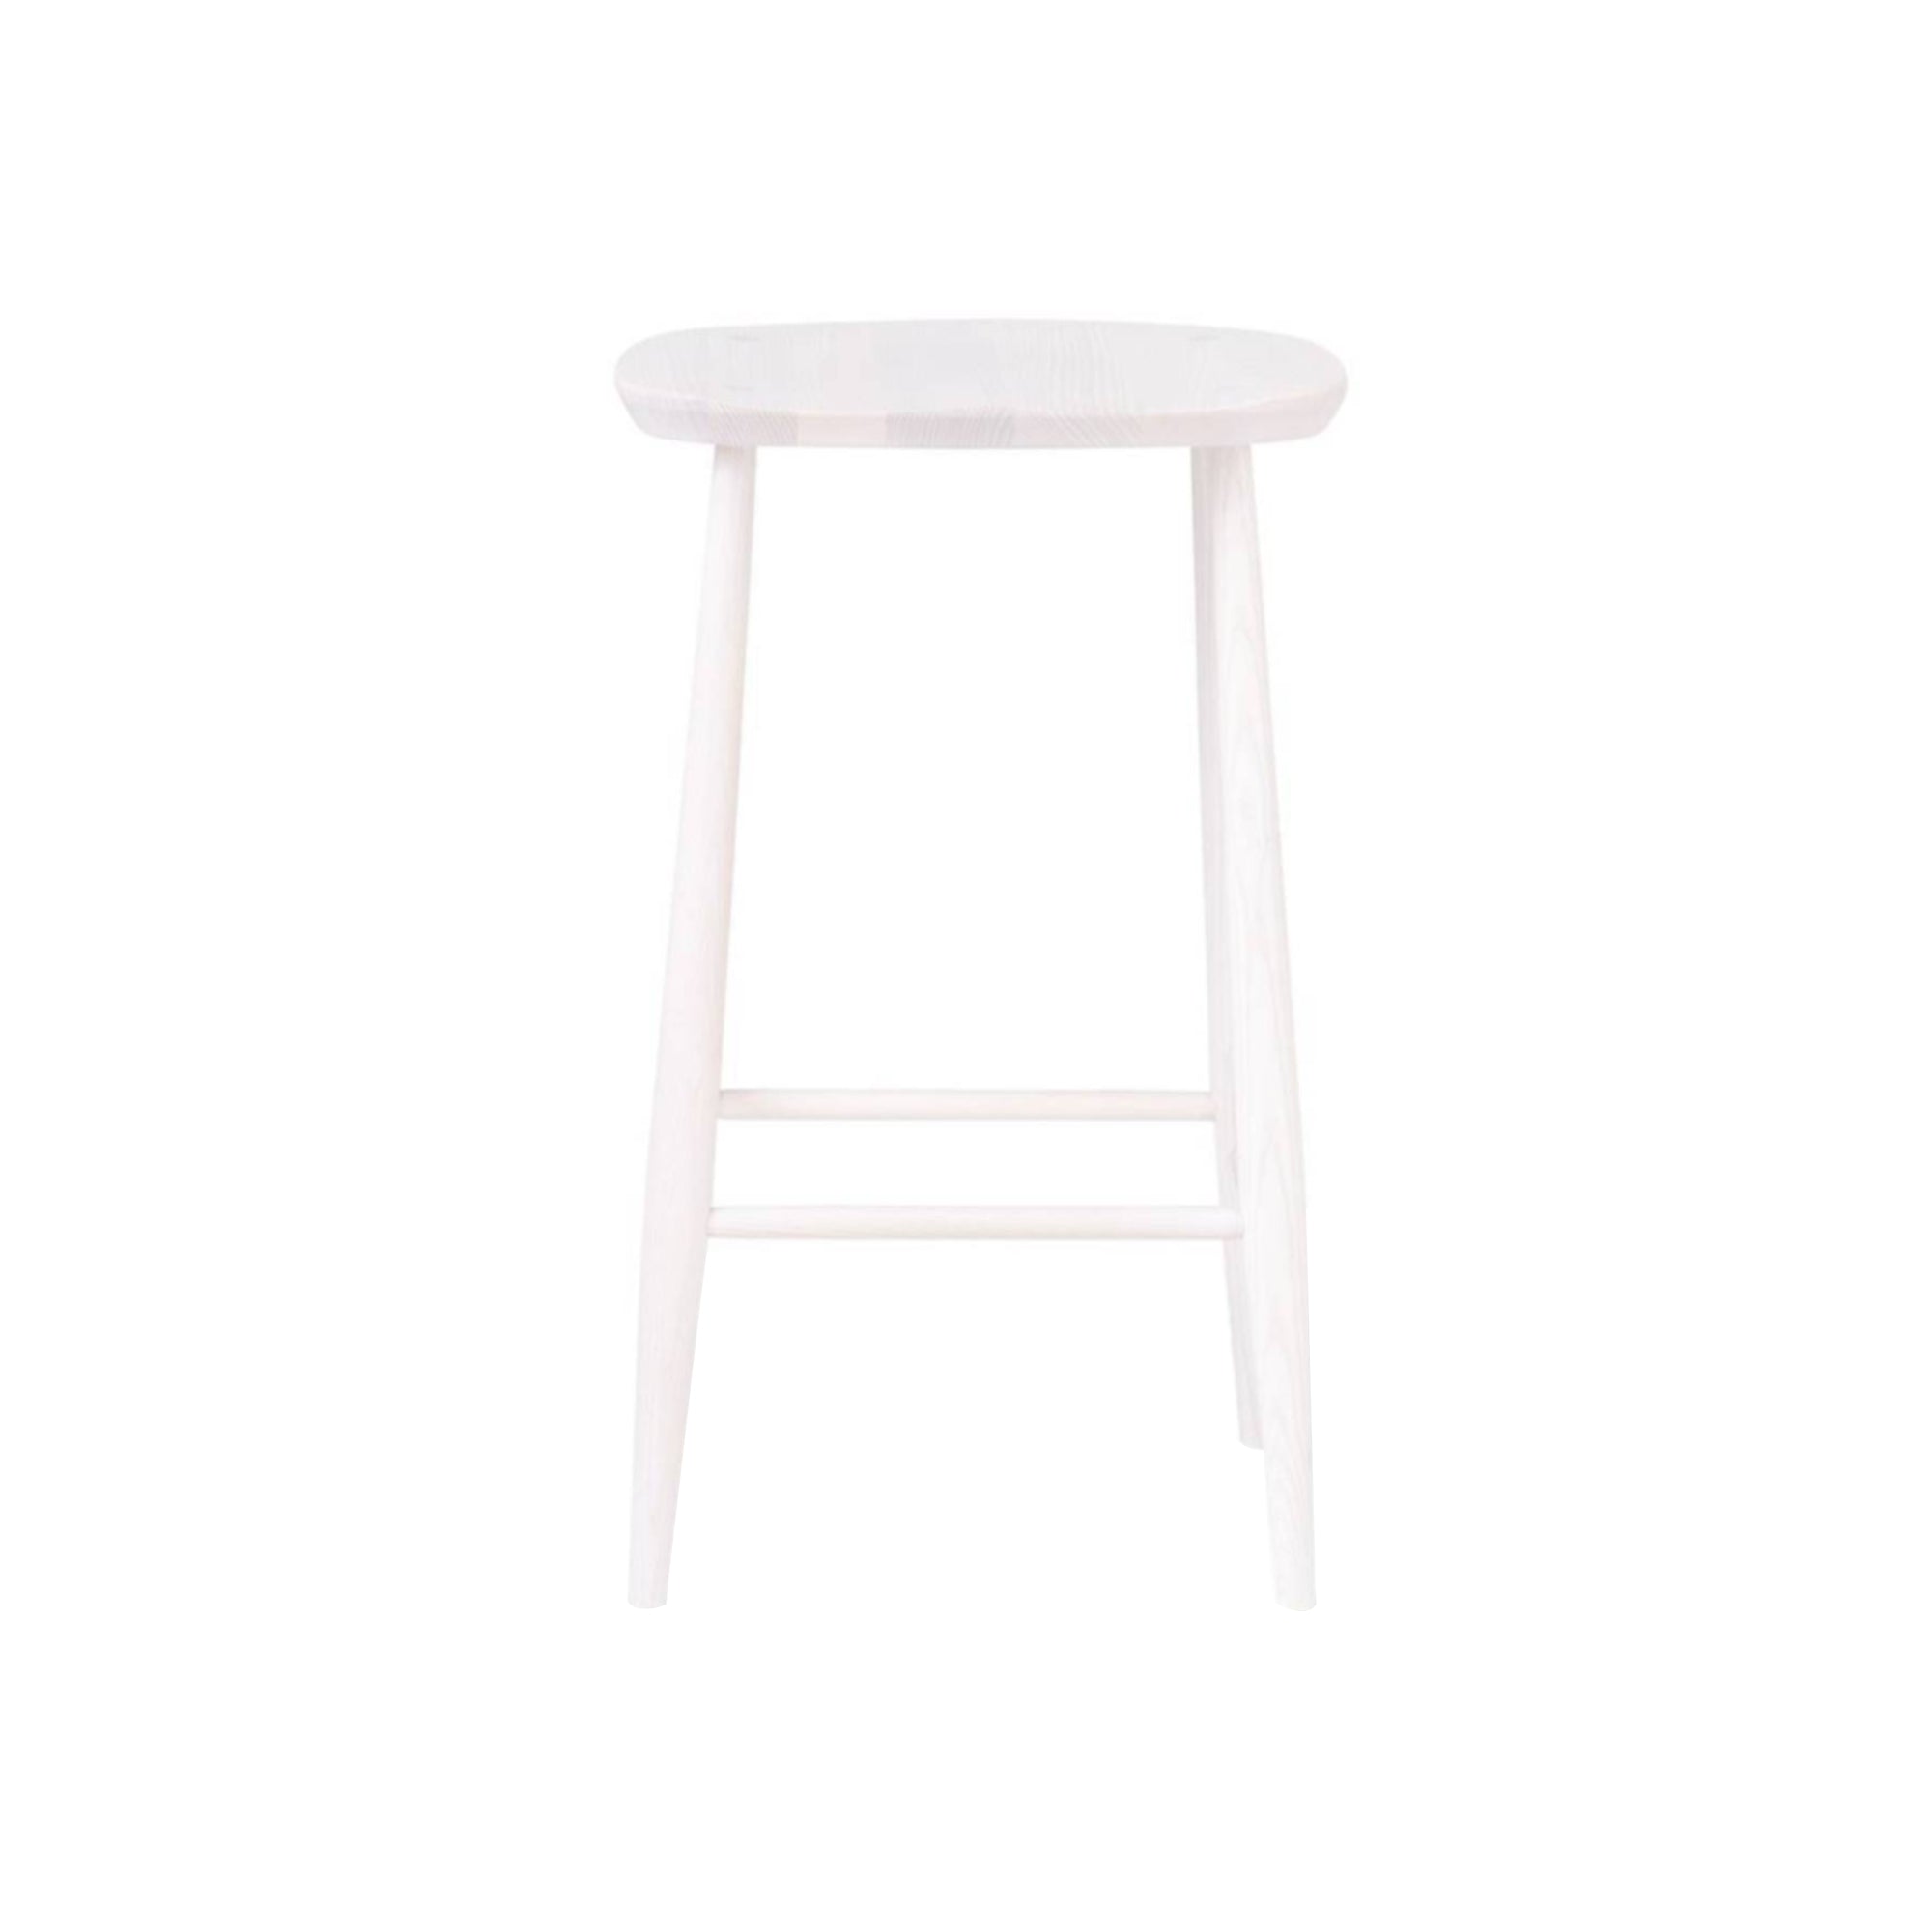 Originals Utility Bar + Counter Stool: Counter + Stained Off White